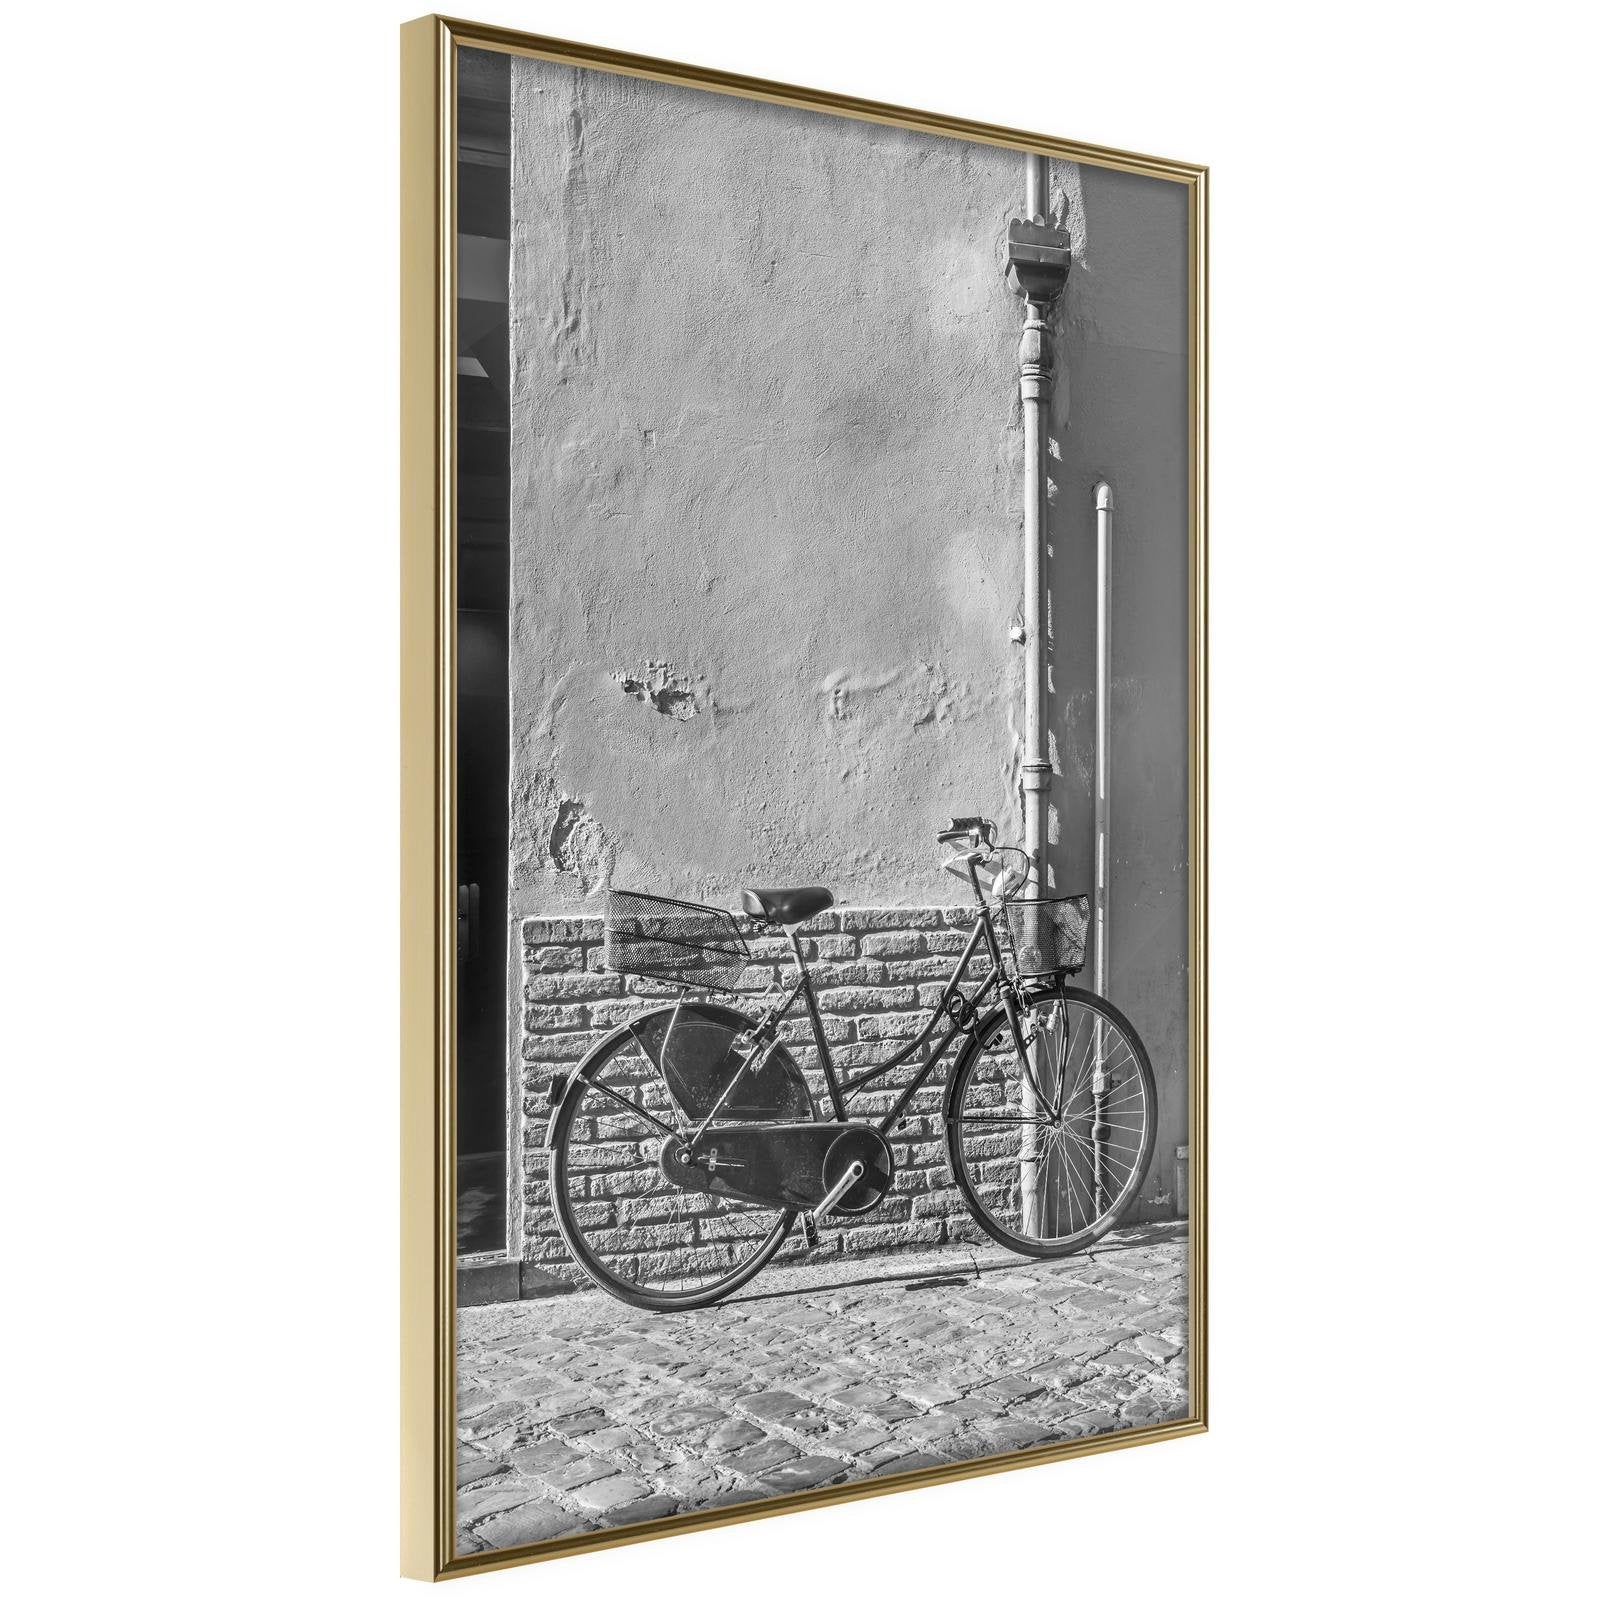 Inramad Poster / Tavla - Bicycle with Black Tires-Poster Inramad-Artgeist-20x30-Guldram-peaceofhome.se